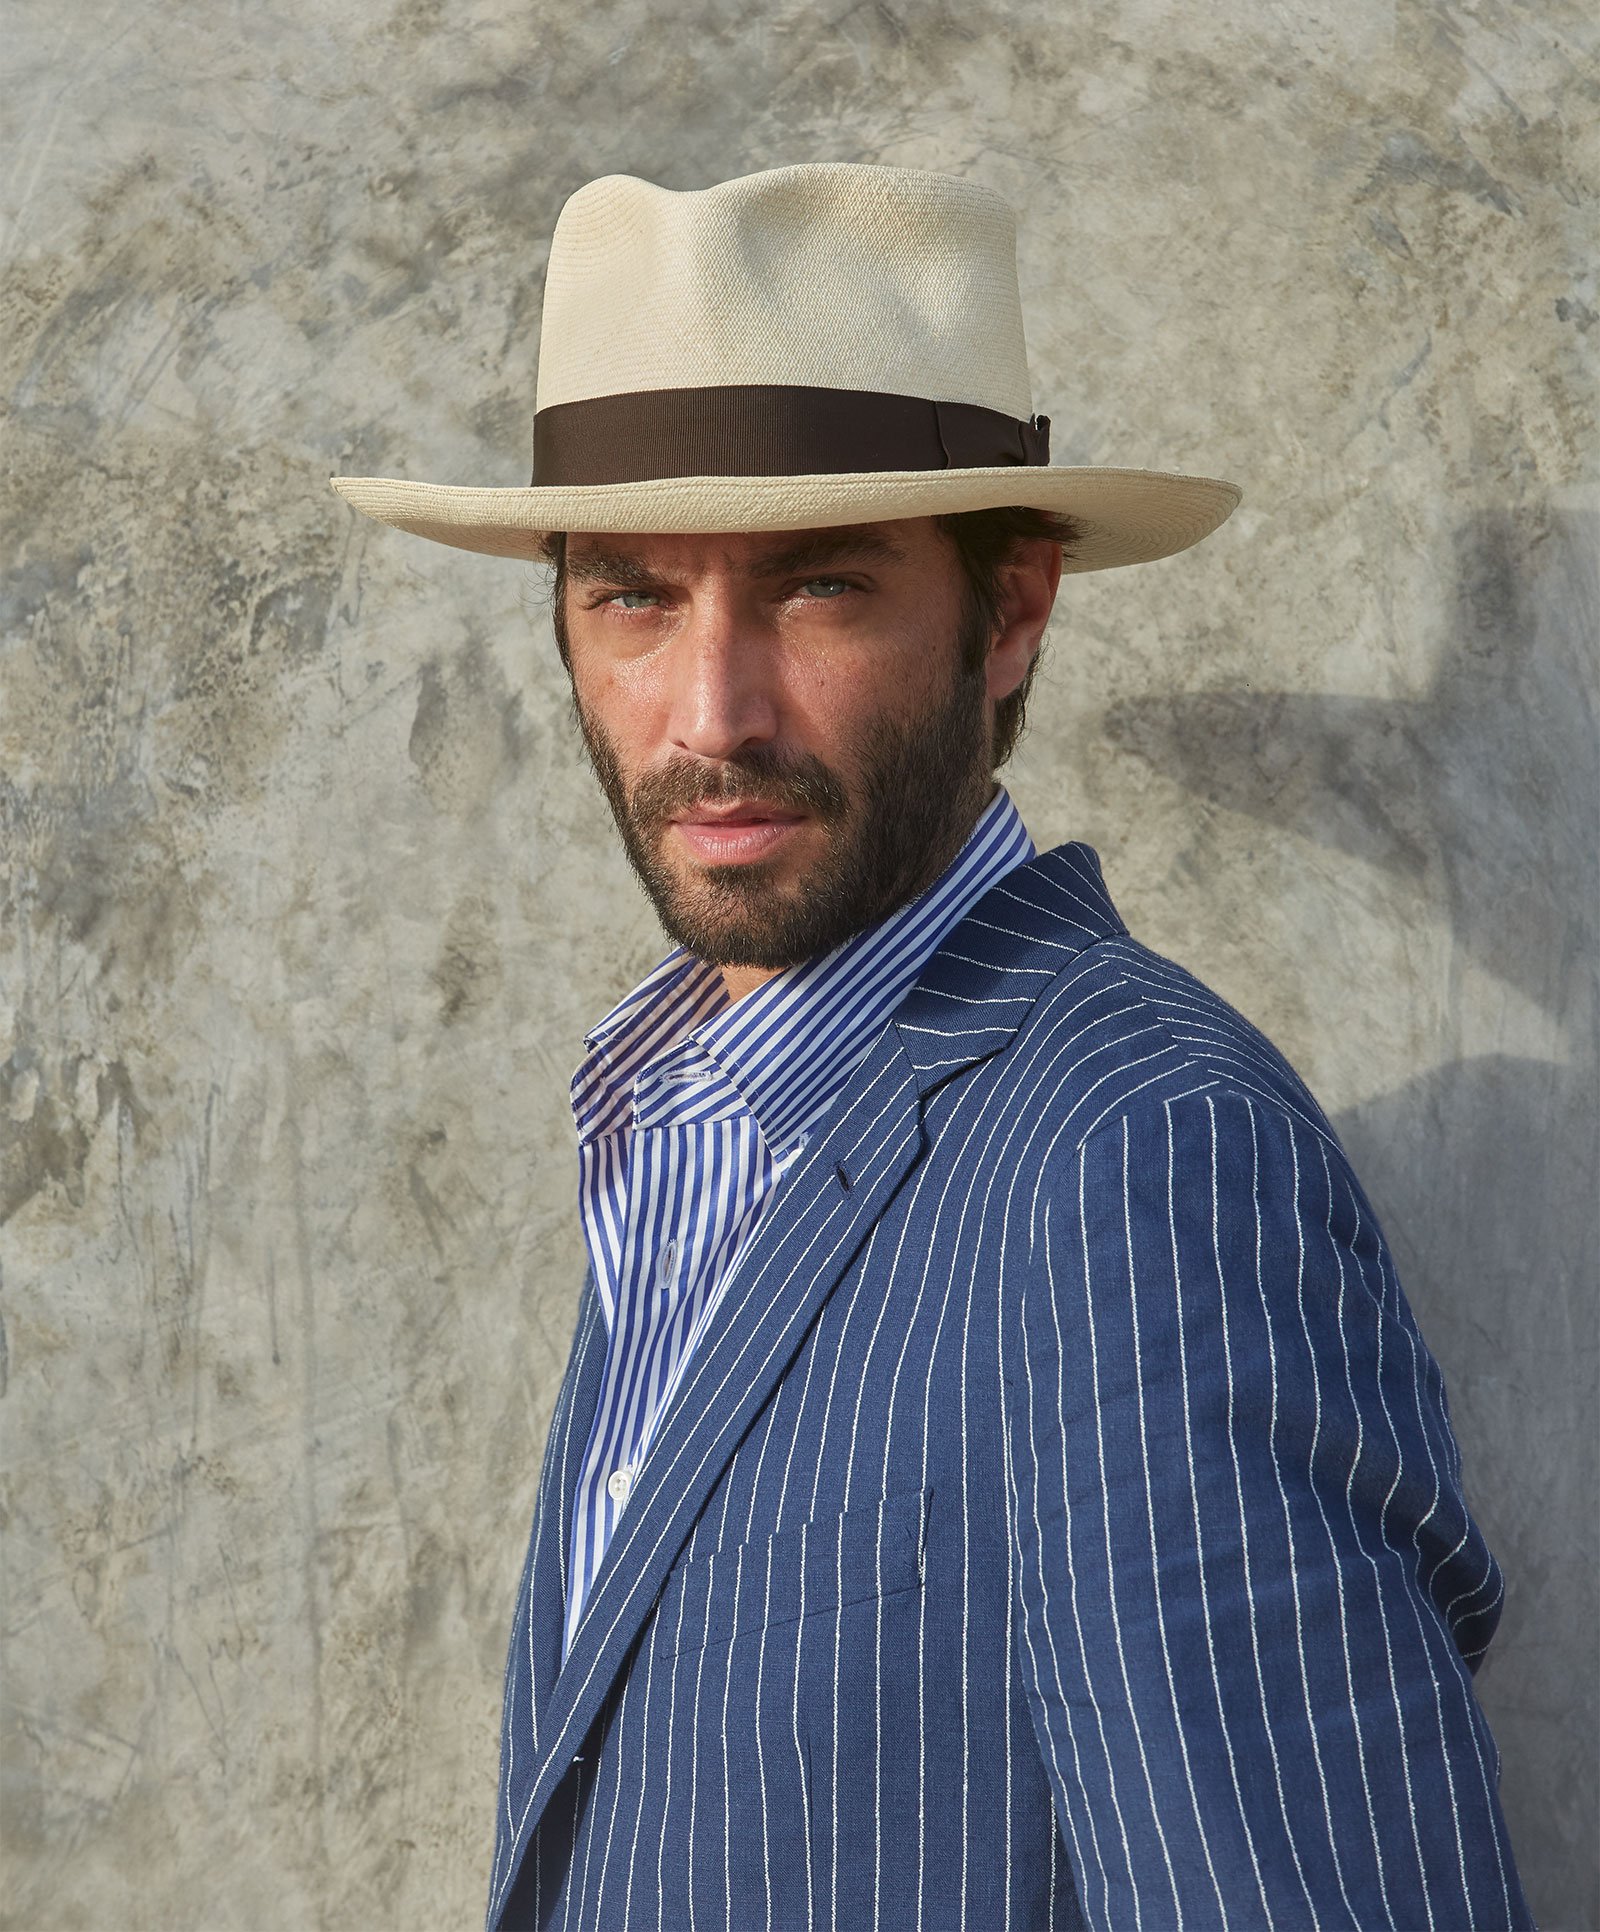 Design
Rarer than a perfect diamond and infinitely more refined, we are proud to carry the most exquisitely crafted Montecristi Panama hats in the world. Depending on the quality of the weave, a Worth & Worth Montecristi Panama Hat can take several months to weave by our master weavers in Ecuador. Available in four different qualities, the result is a hat with a soft texture, translucent appearance, and luminous ivory color.
Material
Our Montecristi Panama straw is handwoven in Ecuador and available in 4 different qualities: Artisan, Master, Museum, and Superfino.
Specifications
With its teardrop Style, our Montecristi Casablanca combines a 3 3/4” to a 4 crown (depending on your head size) with a 2 3/4 to a 3 1/8 brim. The larger brim offers ample shade for the next time you find yourself headed to the Tropics. Handwoven by our master weavers in Ecuador Handcrafted in New York Truly a work of art.